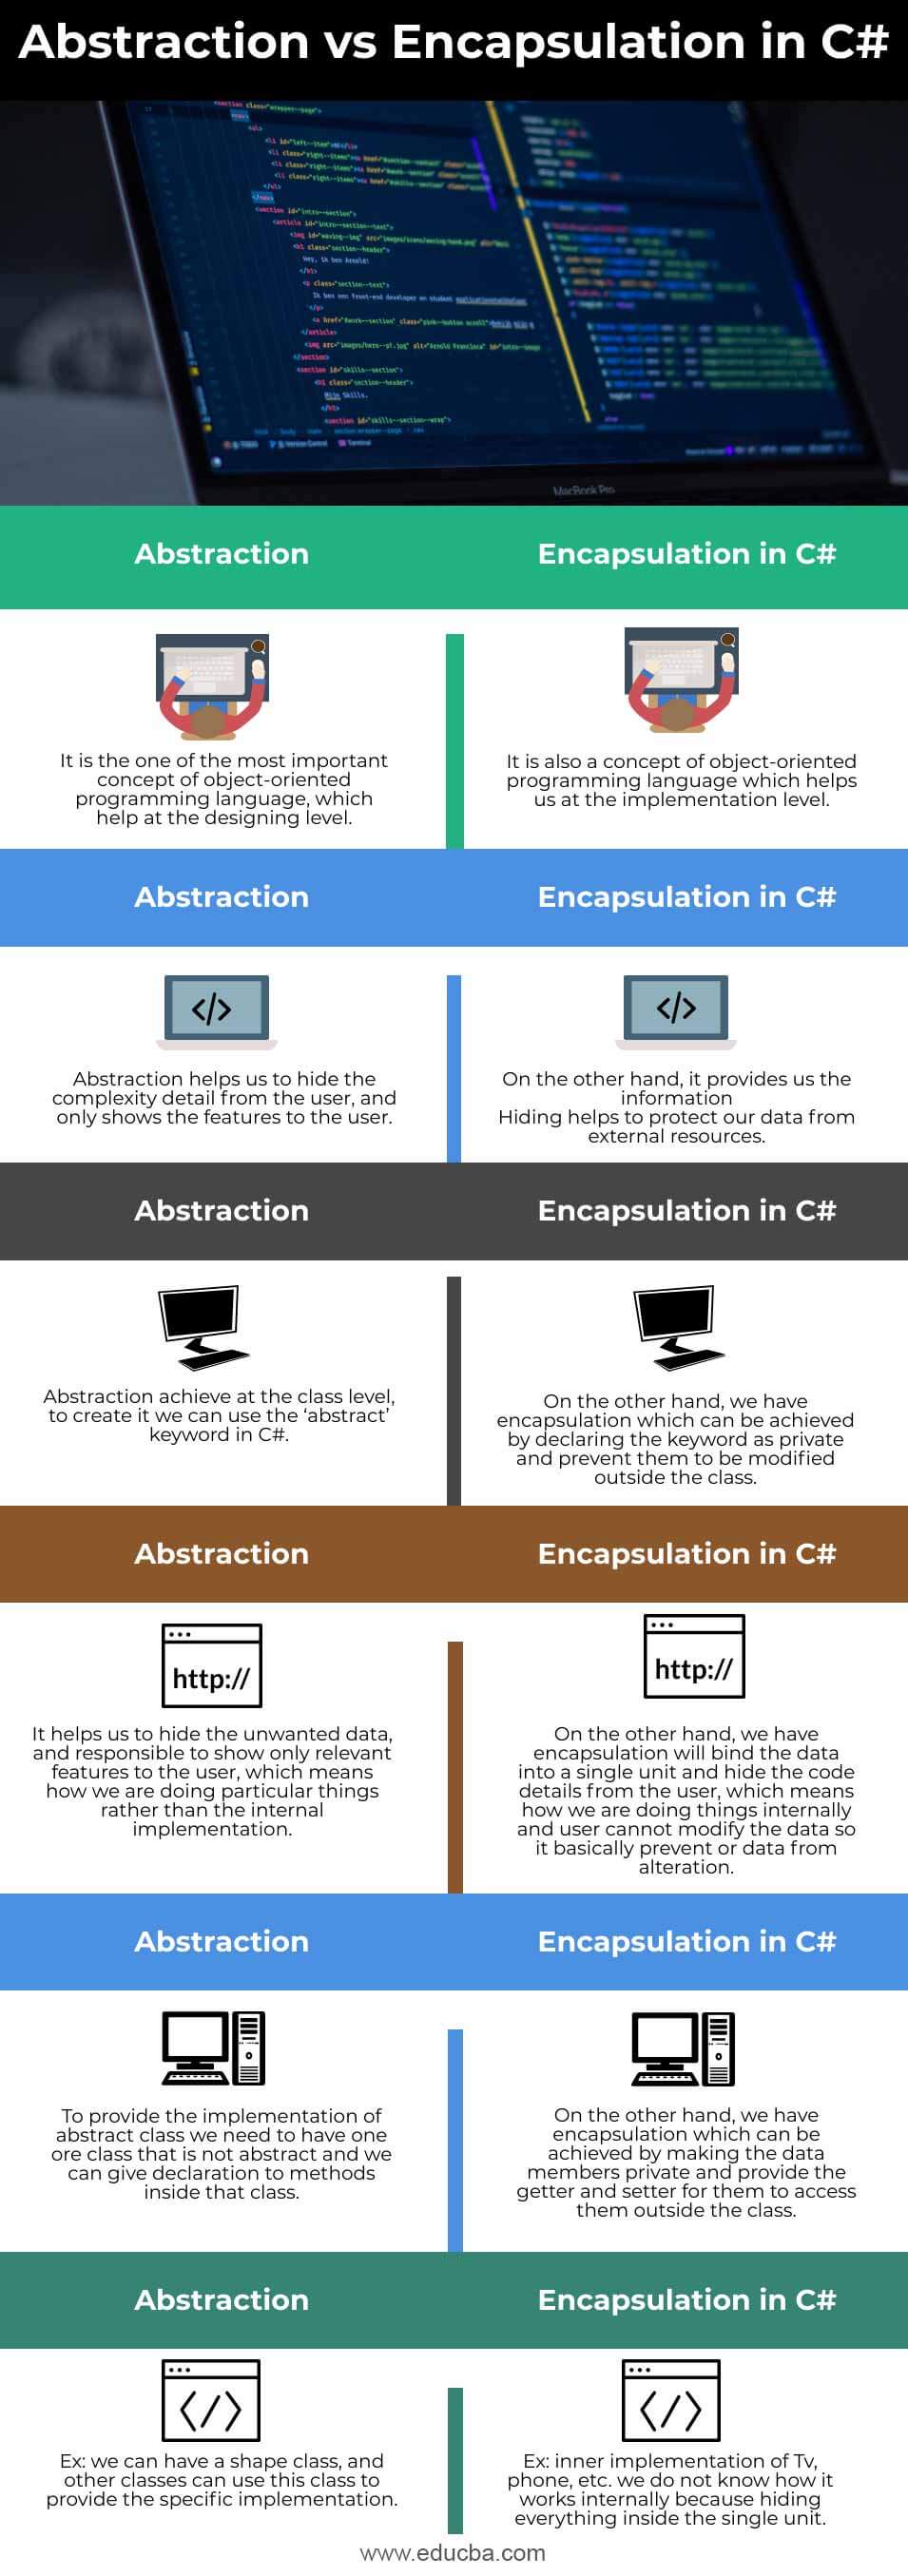 Abstraction-vs-Encapsulation-in-C#-info